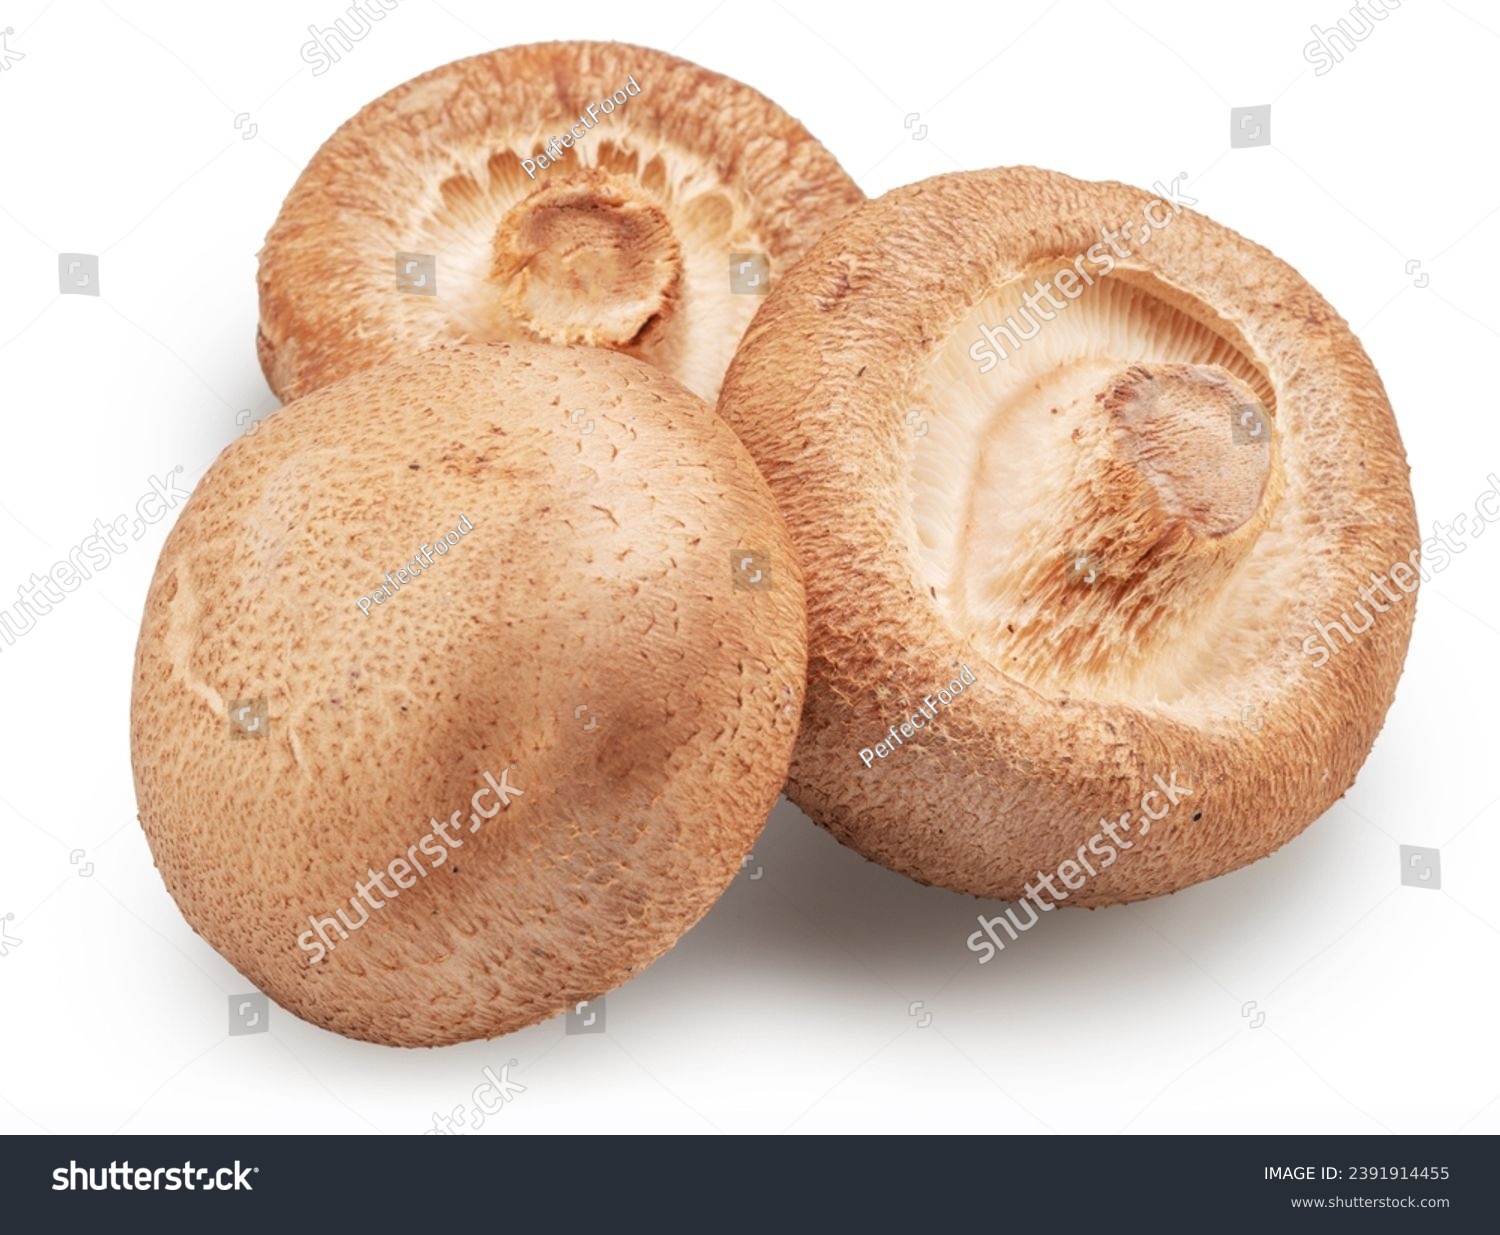 Shiitake - edible asian mushrooms isolated on white background. File contains clipping path. #2391914455